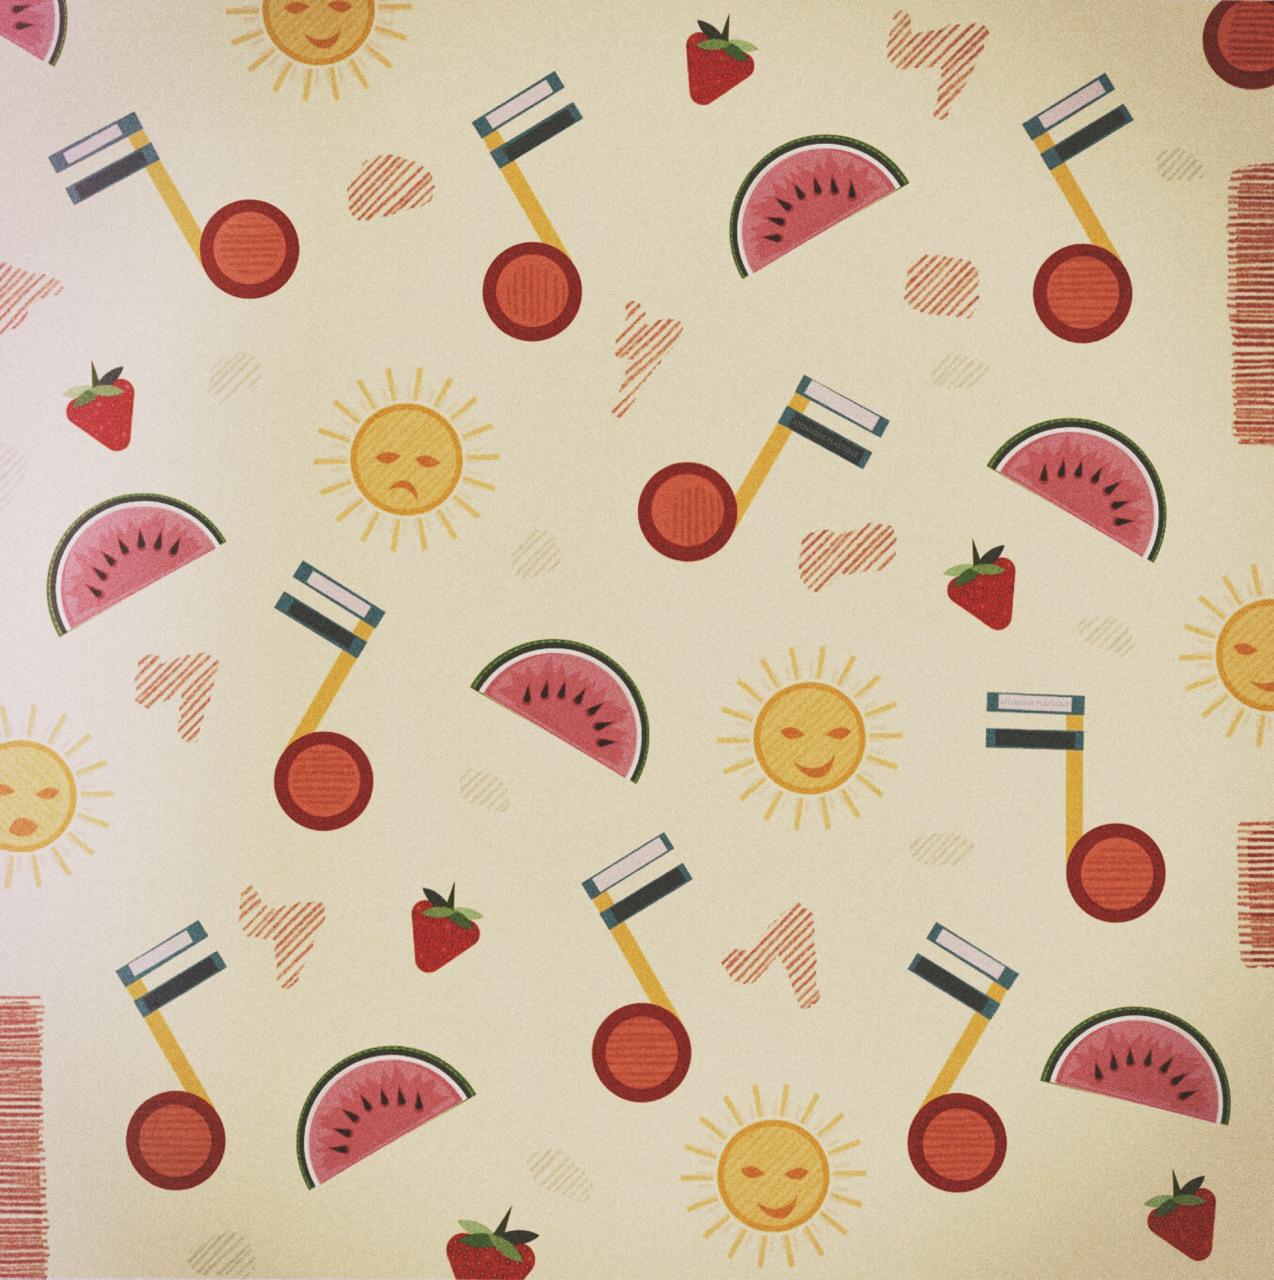 Vintage style “Summer” print design by Atomique Plastique — EatSleepDraw is working on something new and we want you to be the first to know about it. Make sure you’re on our mailing list